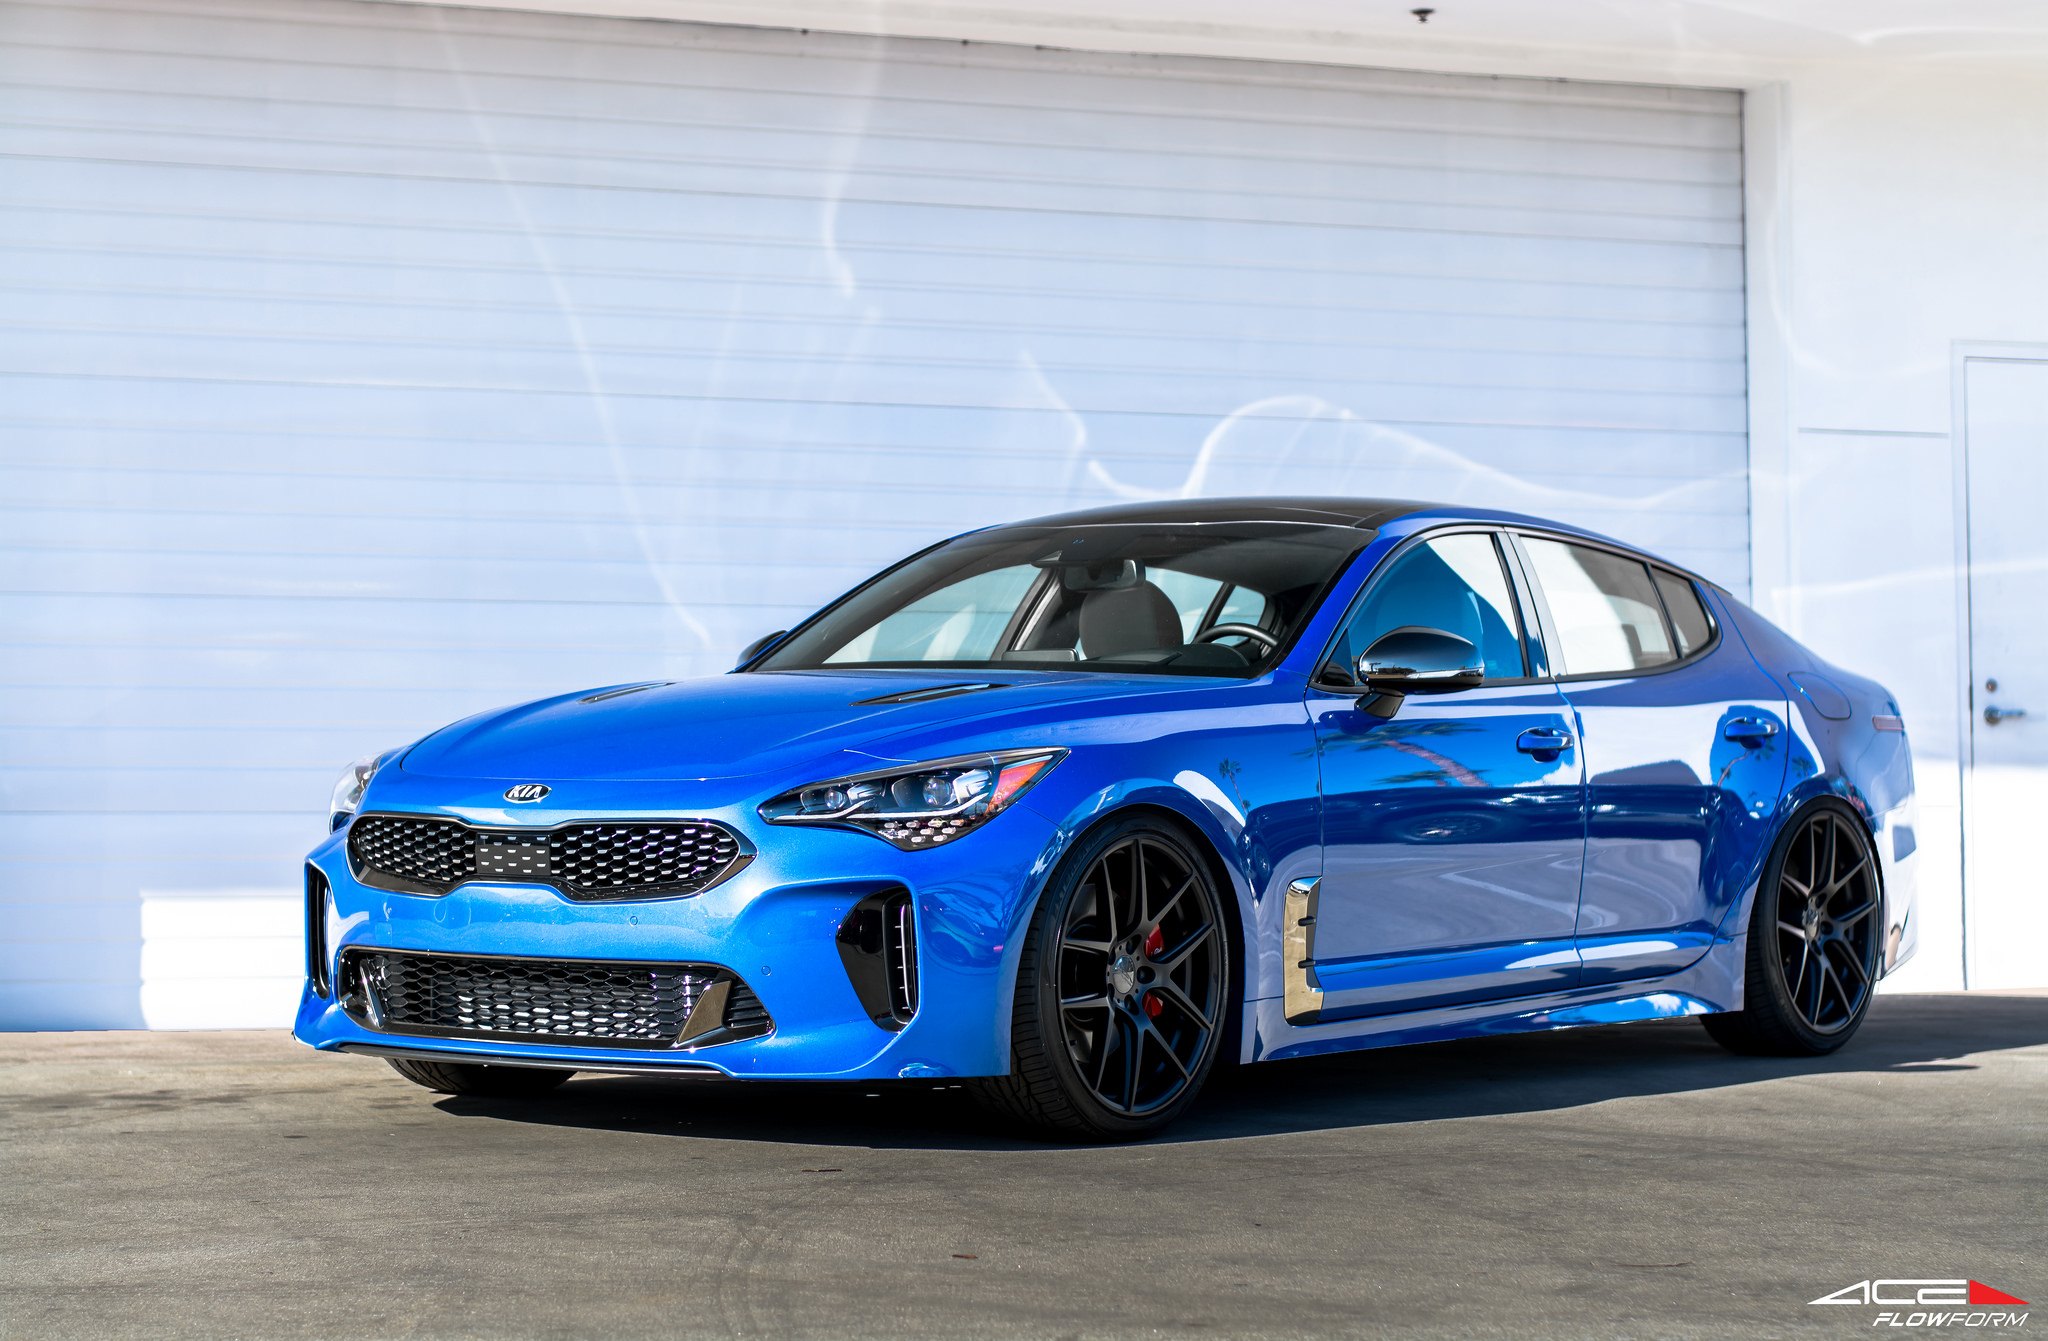 Custom Mesh Grille on Blue Kia Stinger - Photo by Ace Alloy Wheels